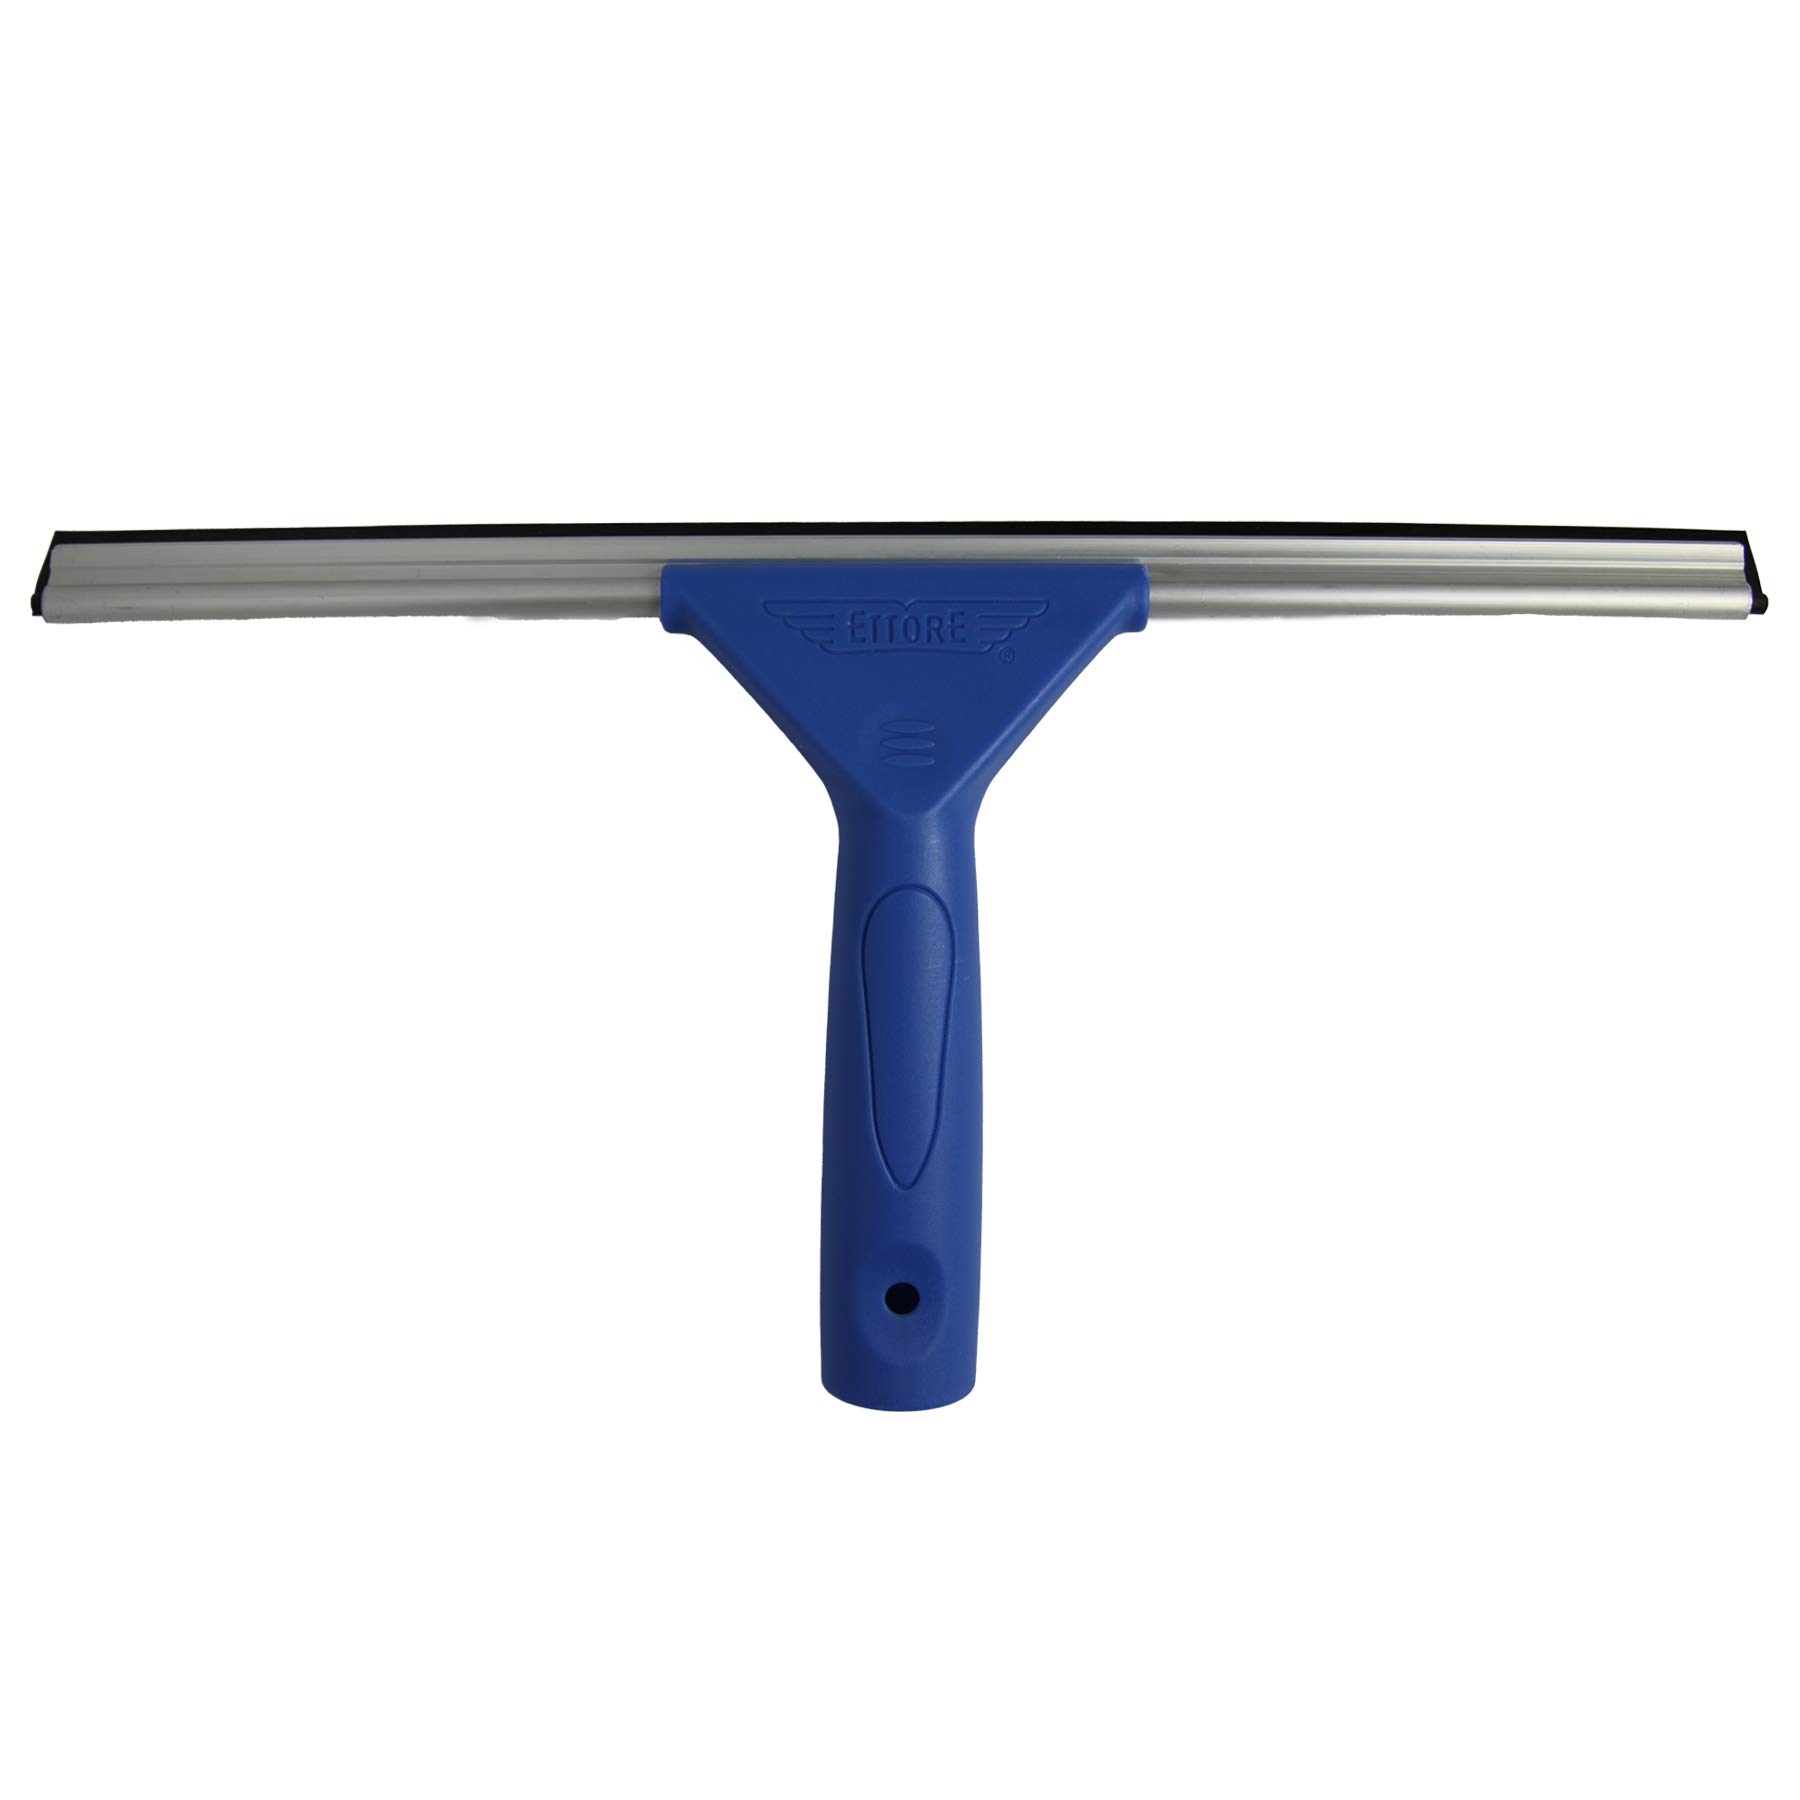 14" Ettore All- Purpose Squeegee (Blue) $5 + Free Shipping w/ Prime or on $35+